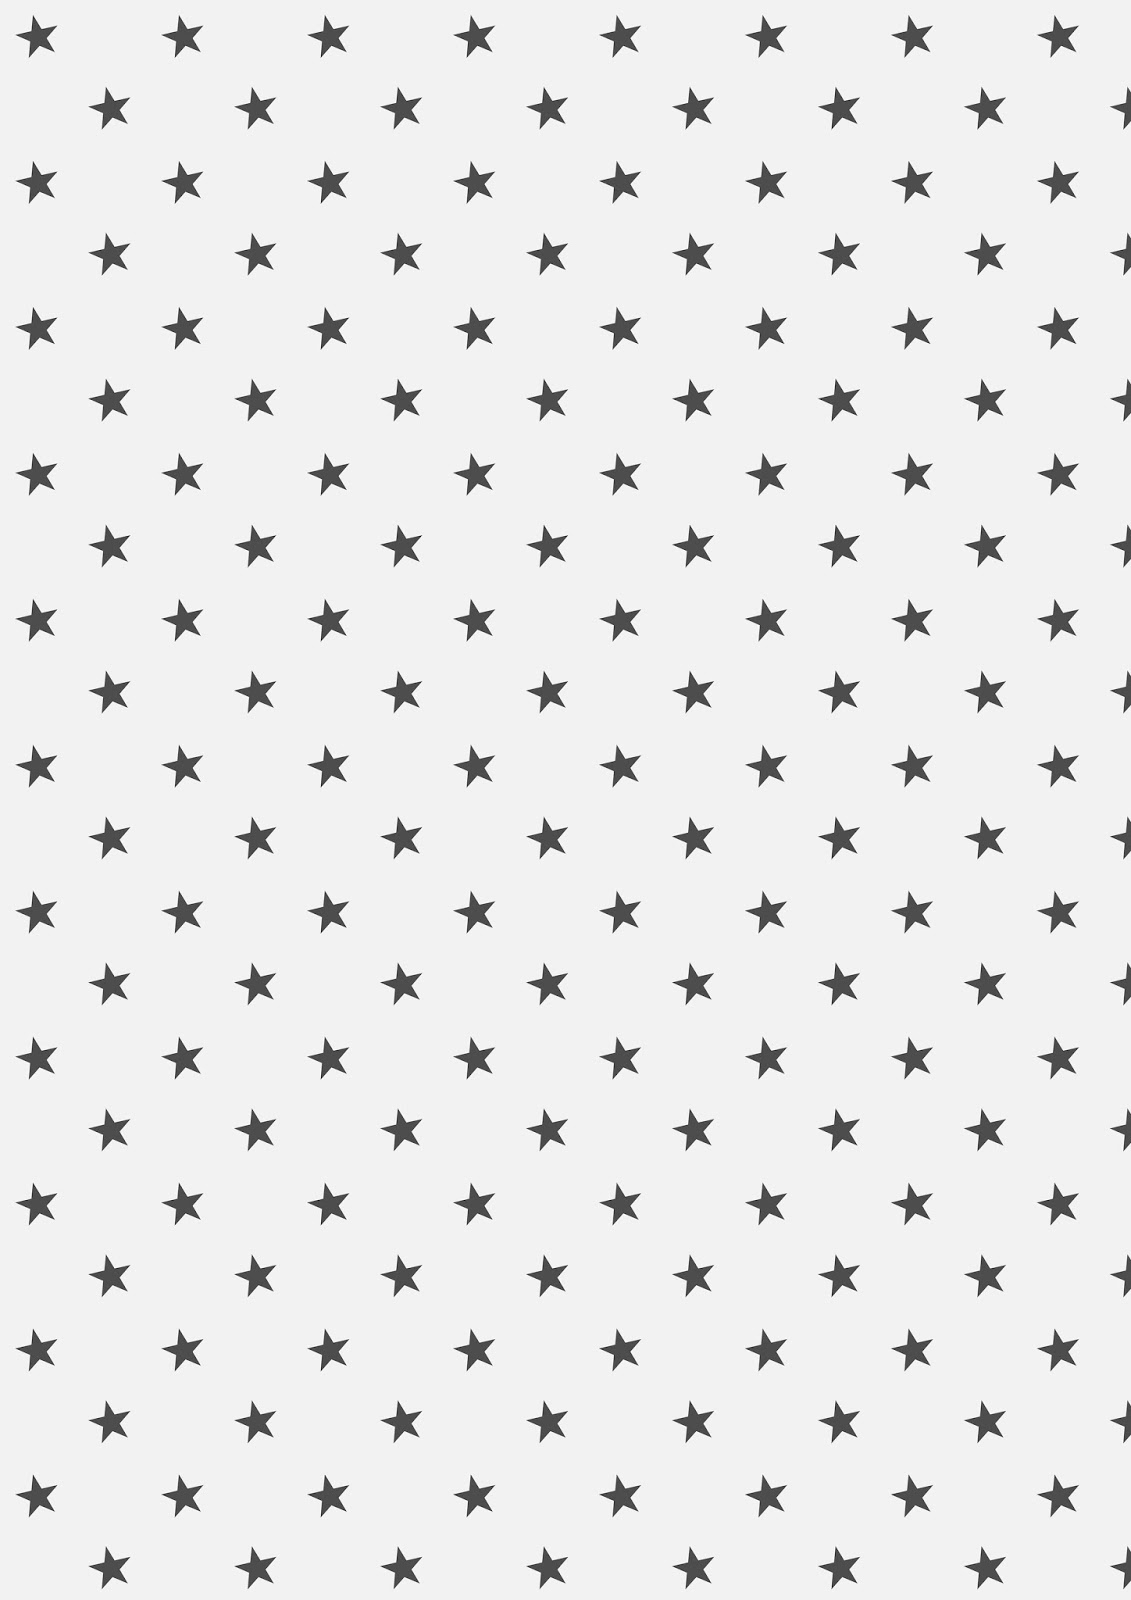 Free Printable Gift Wrapping Paper – Classy Grey Gift Wrap Paper - Free Printable Wrapping Paper Patterns